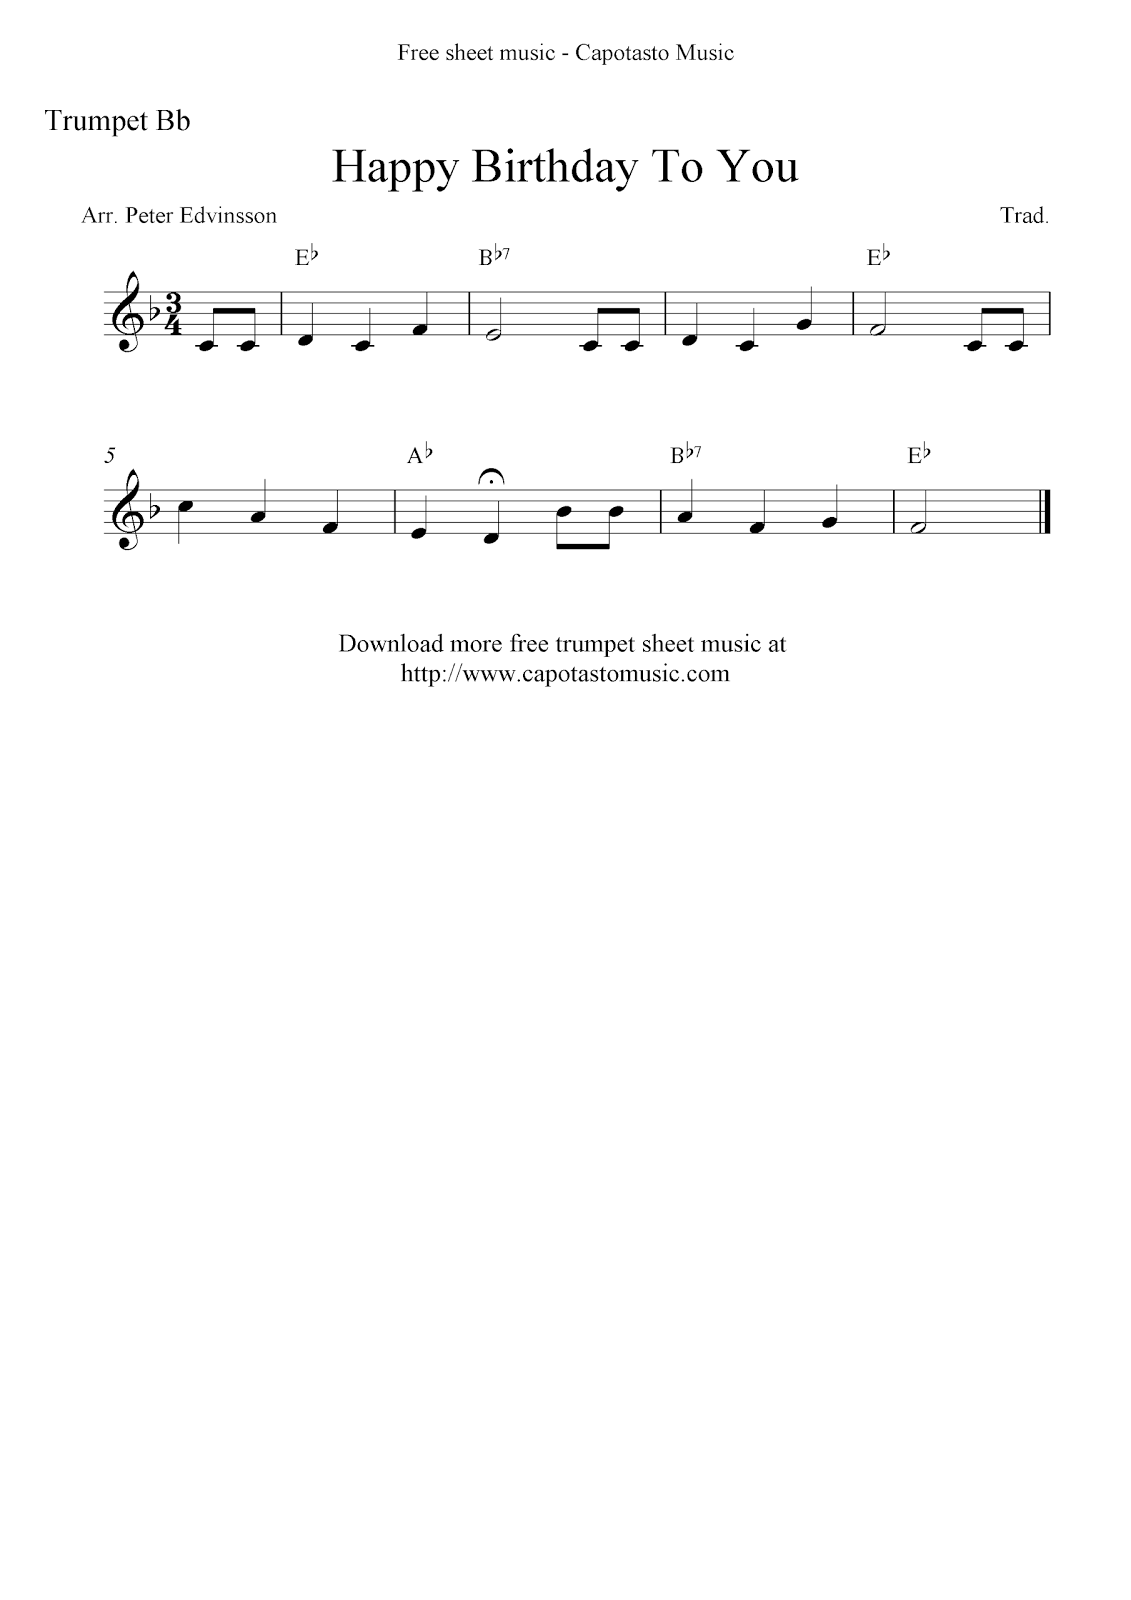 Happy Birthday To You, free trumpet sheet music notes